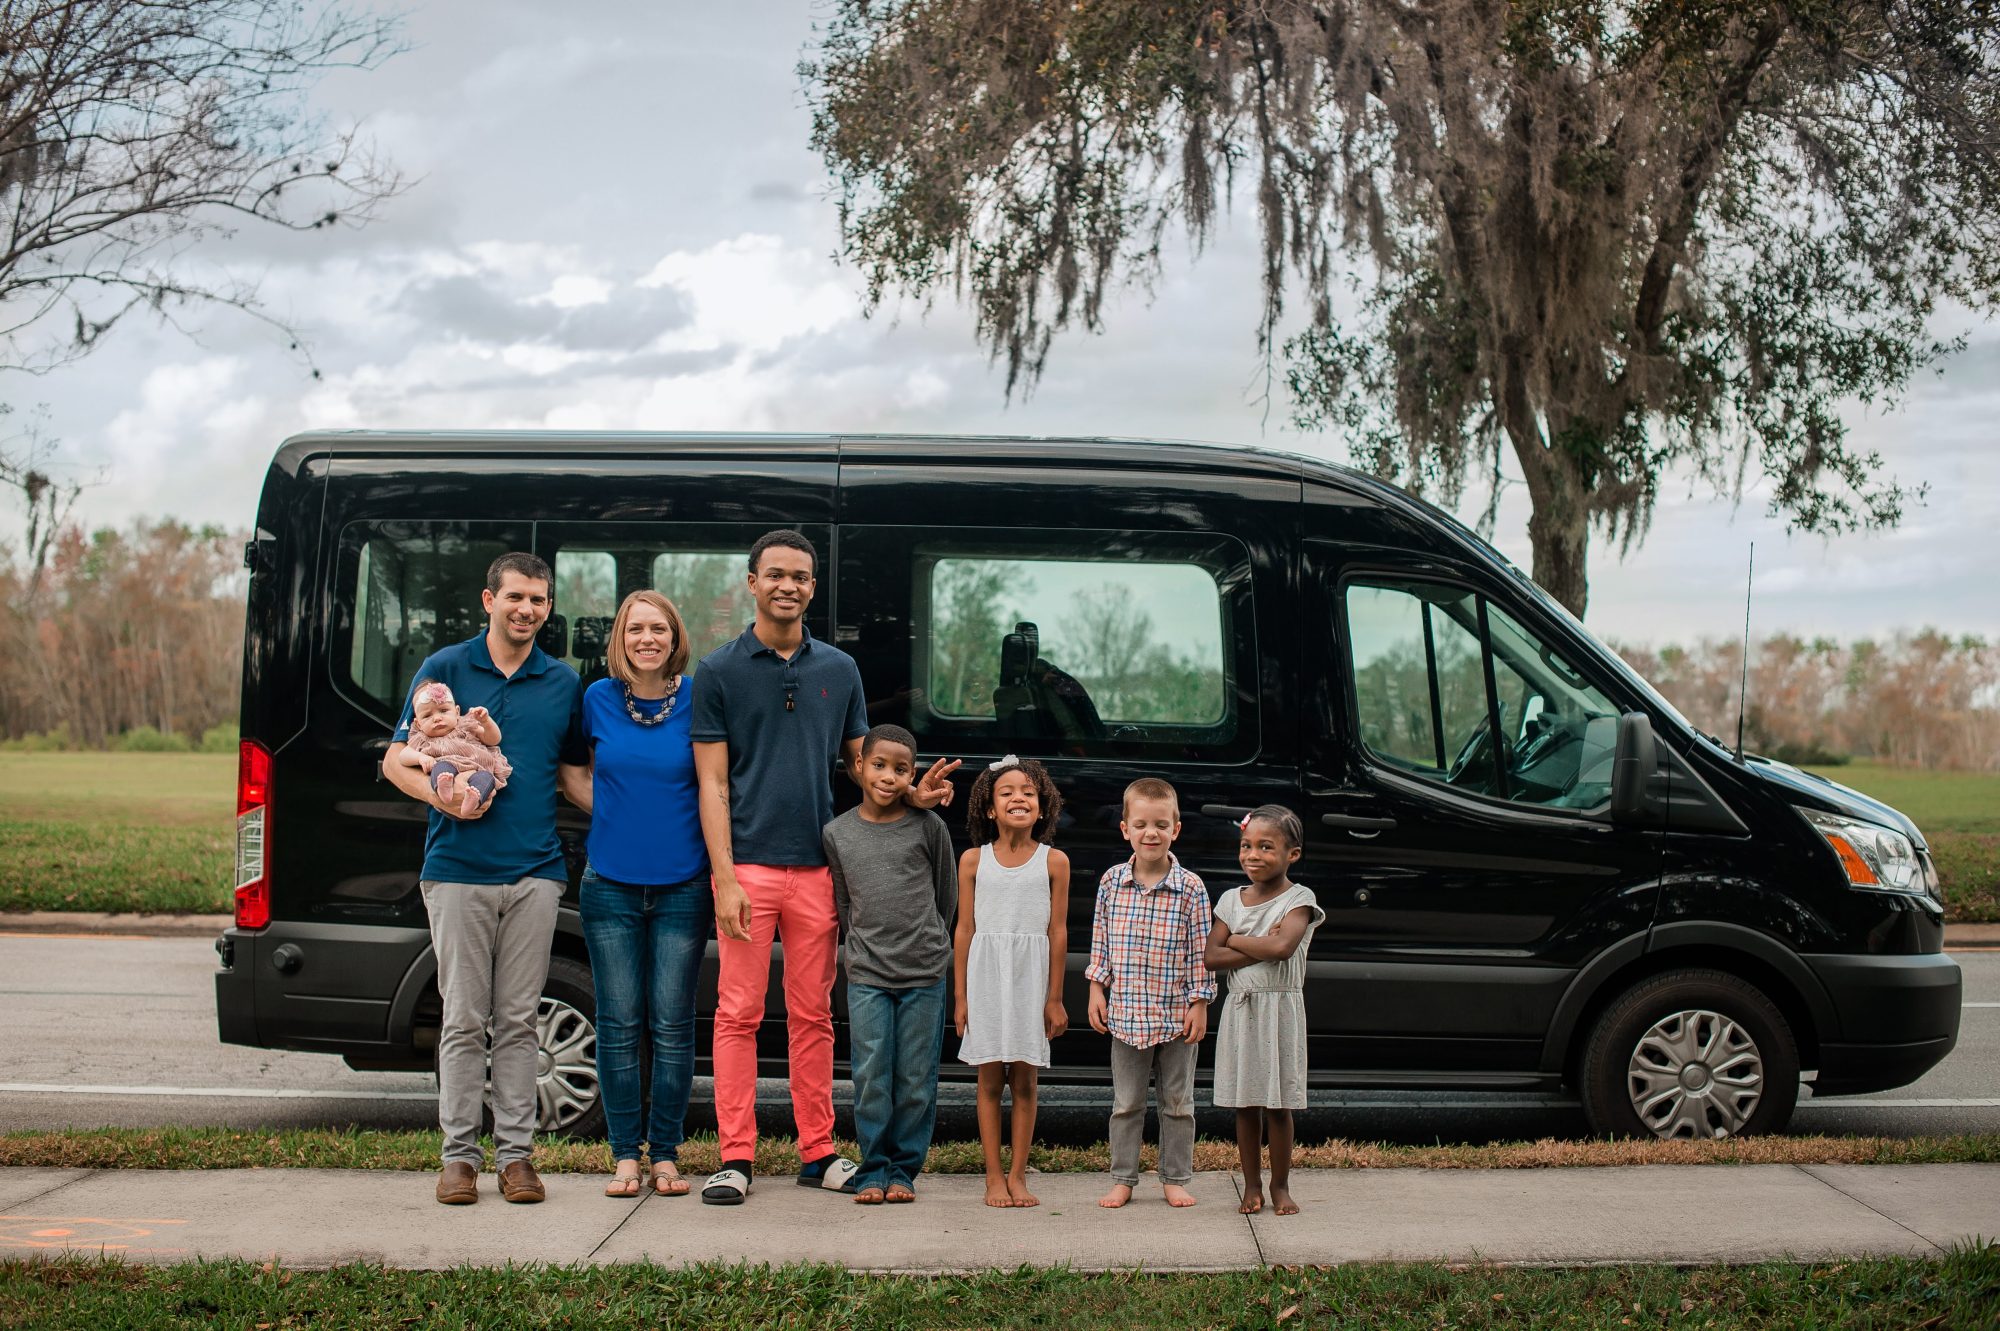 Amico family photo standing in front of van